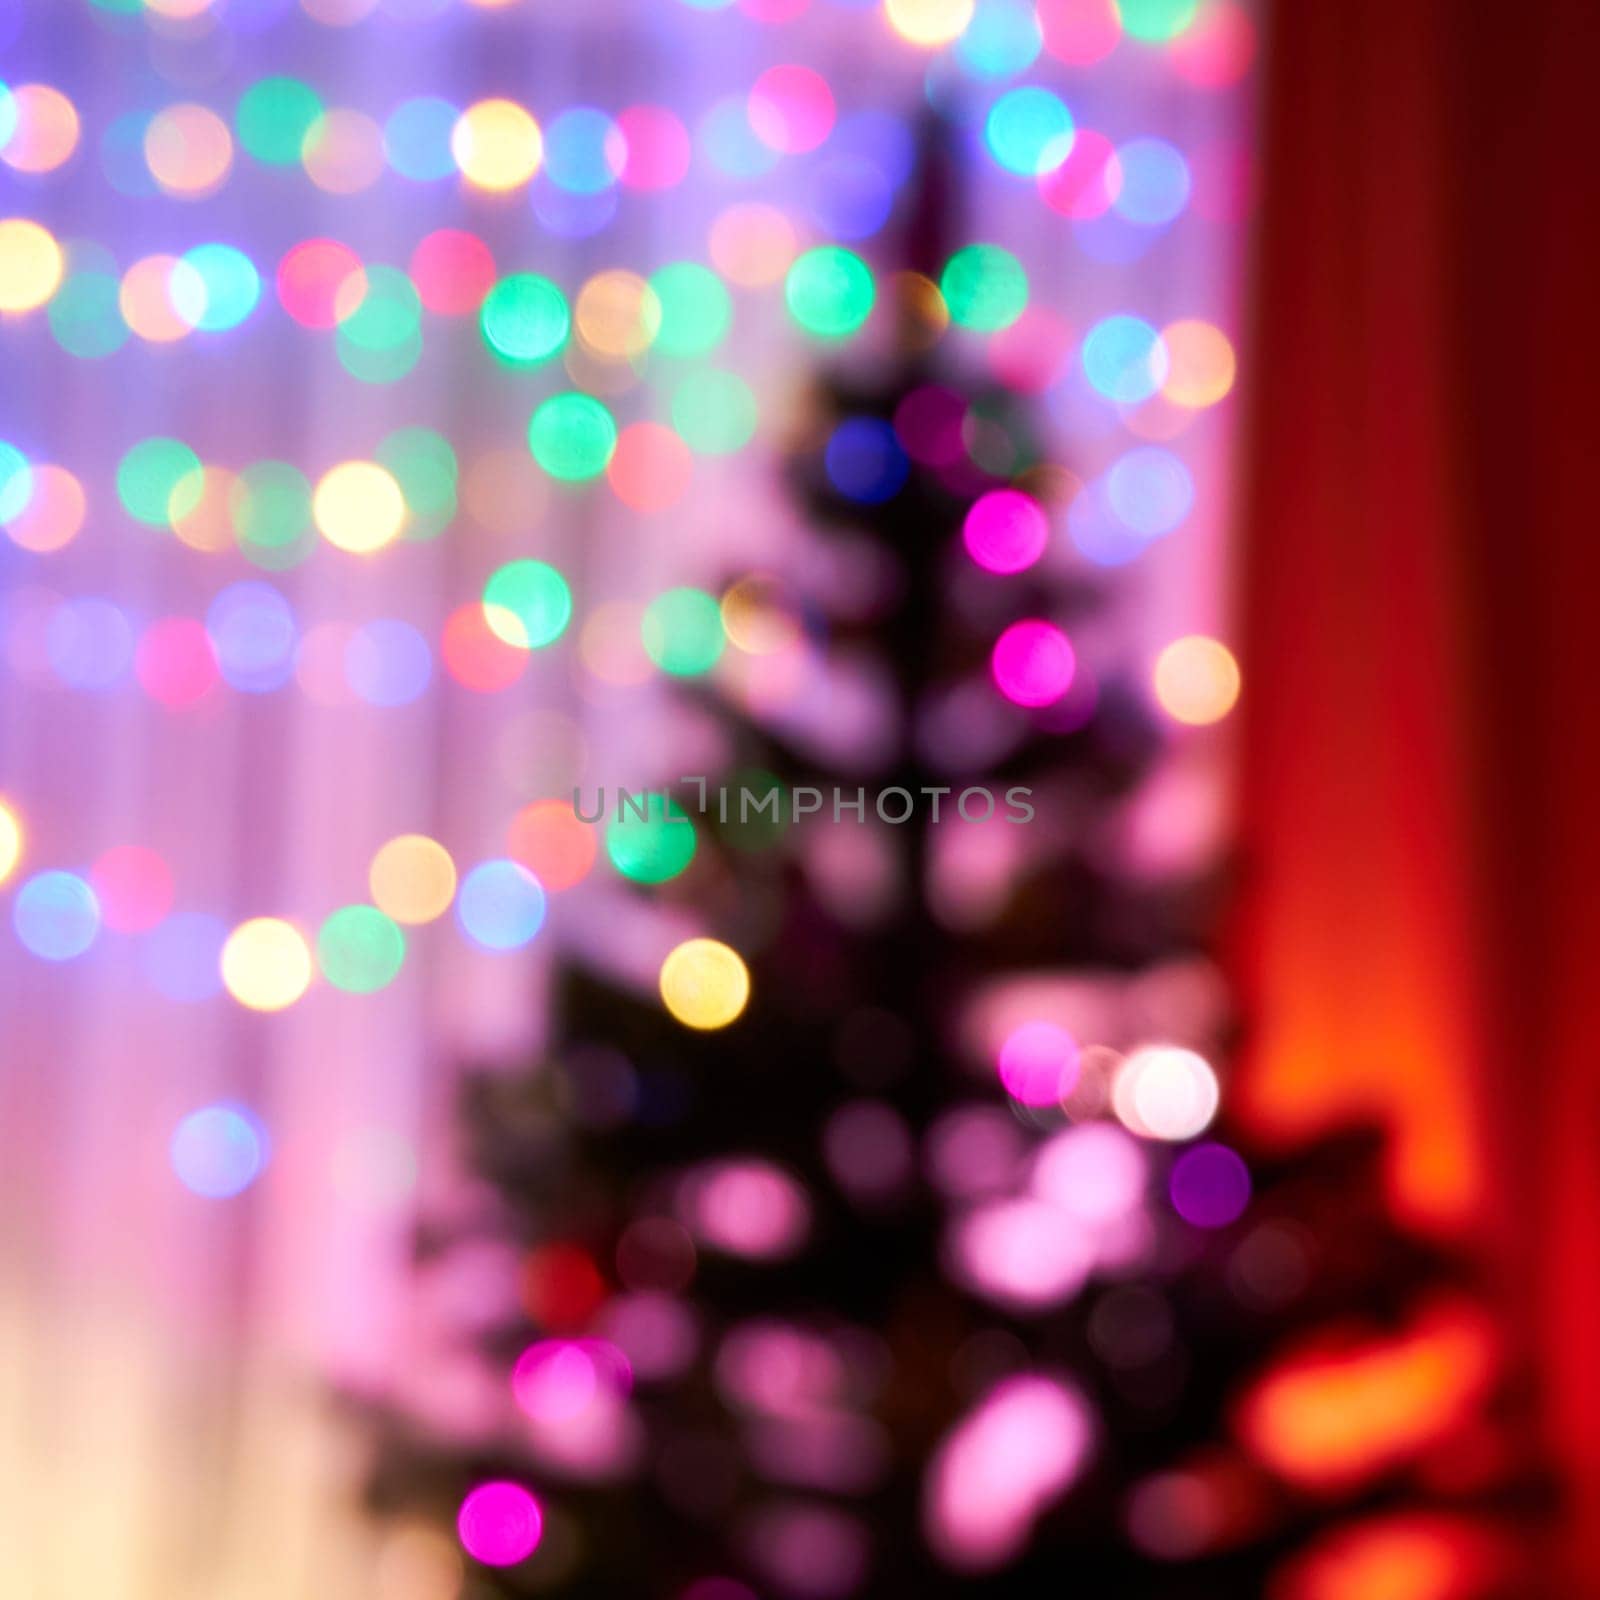 Interior of a room decorated for Christmas, blurry and defocused view